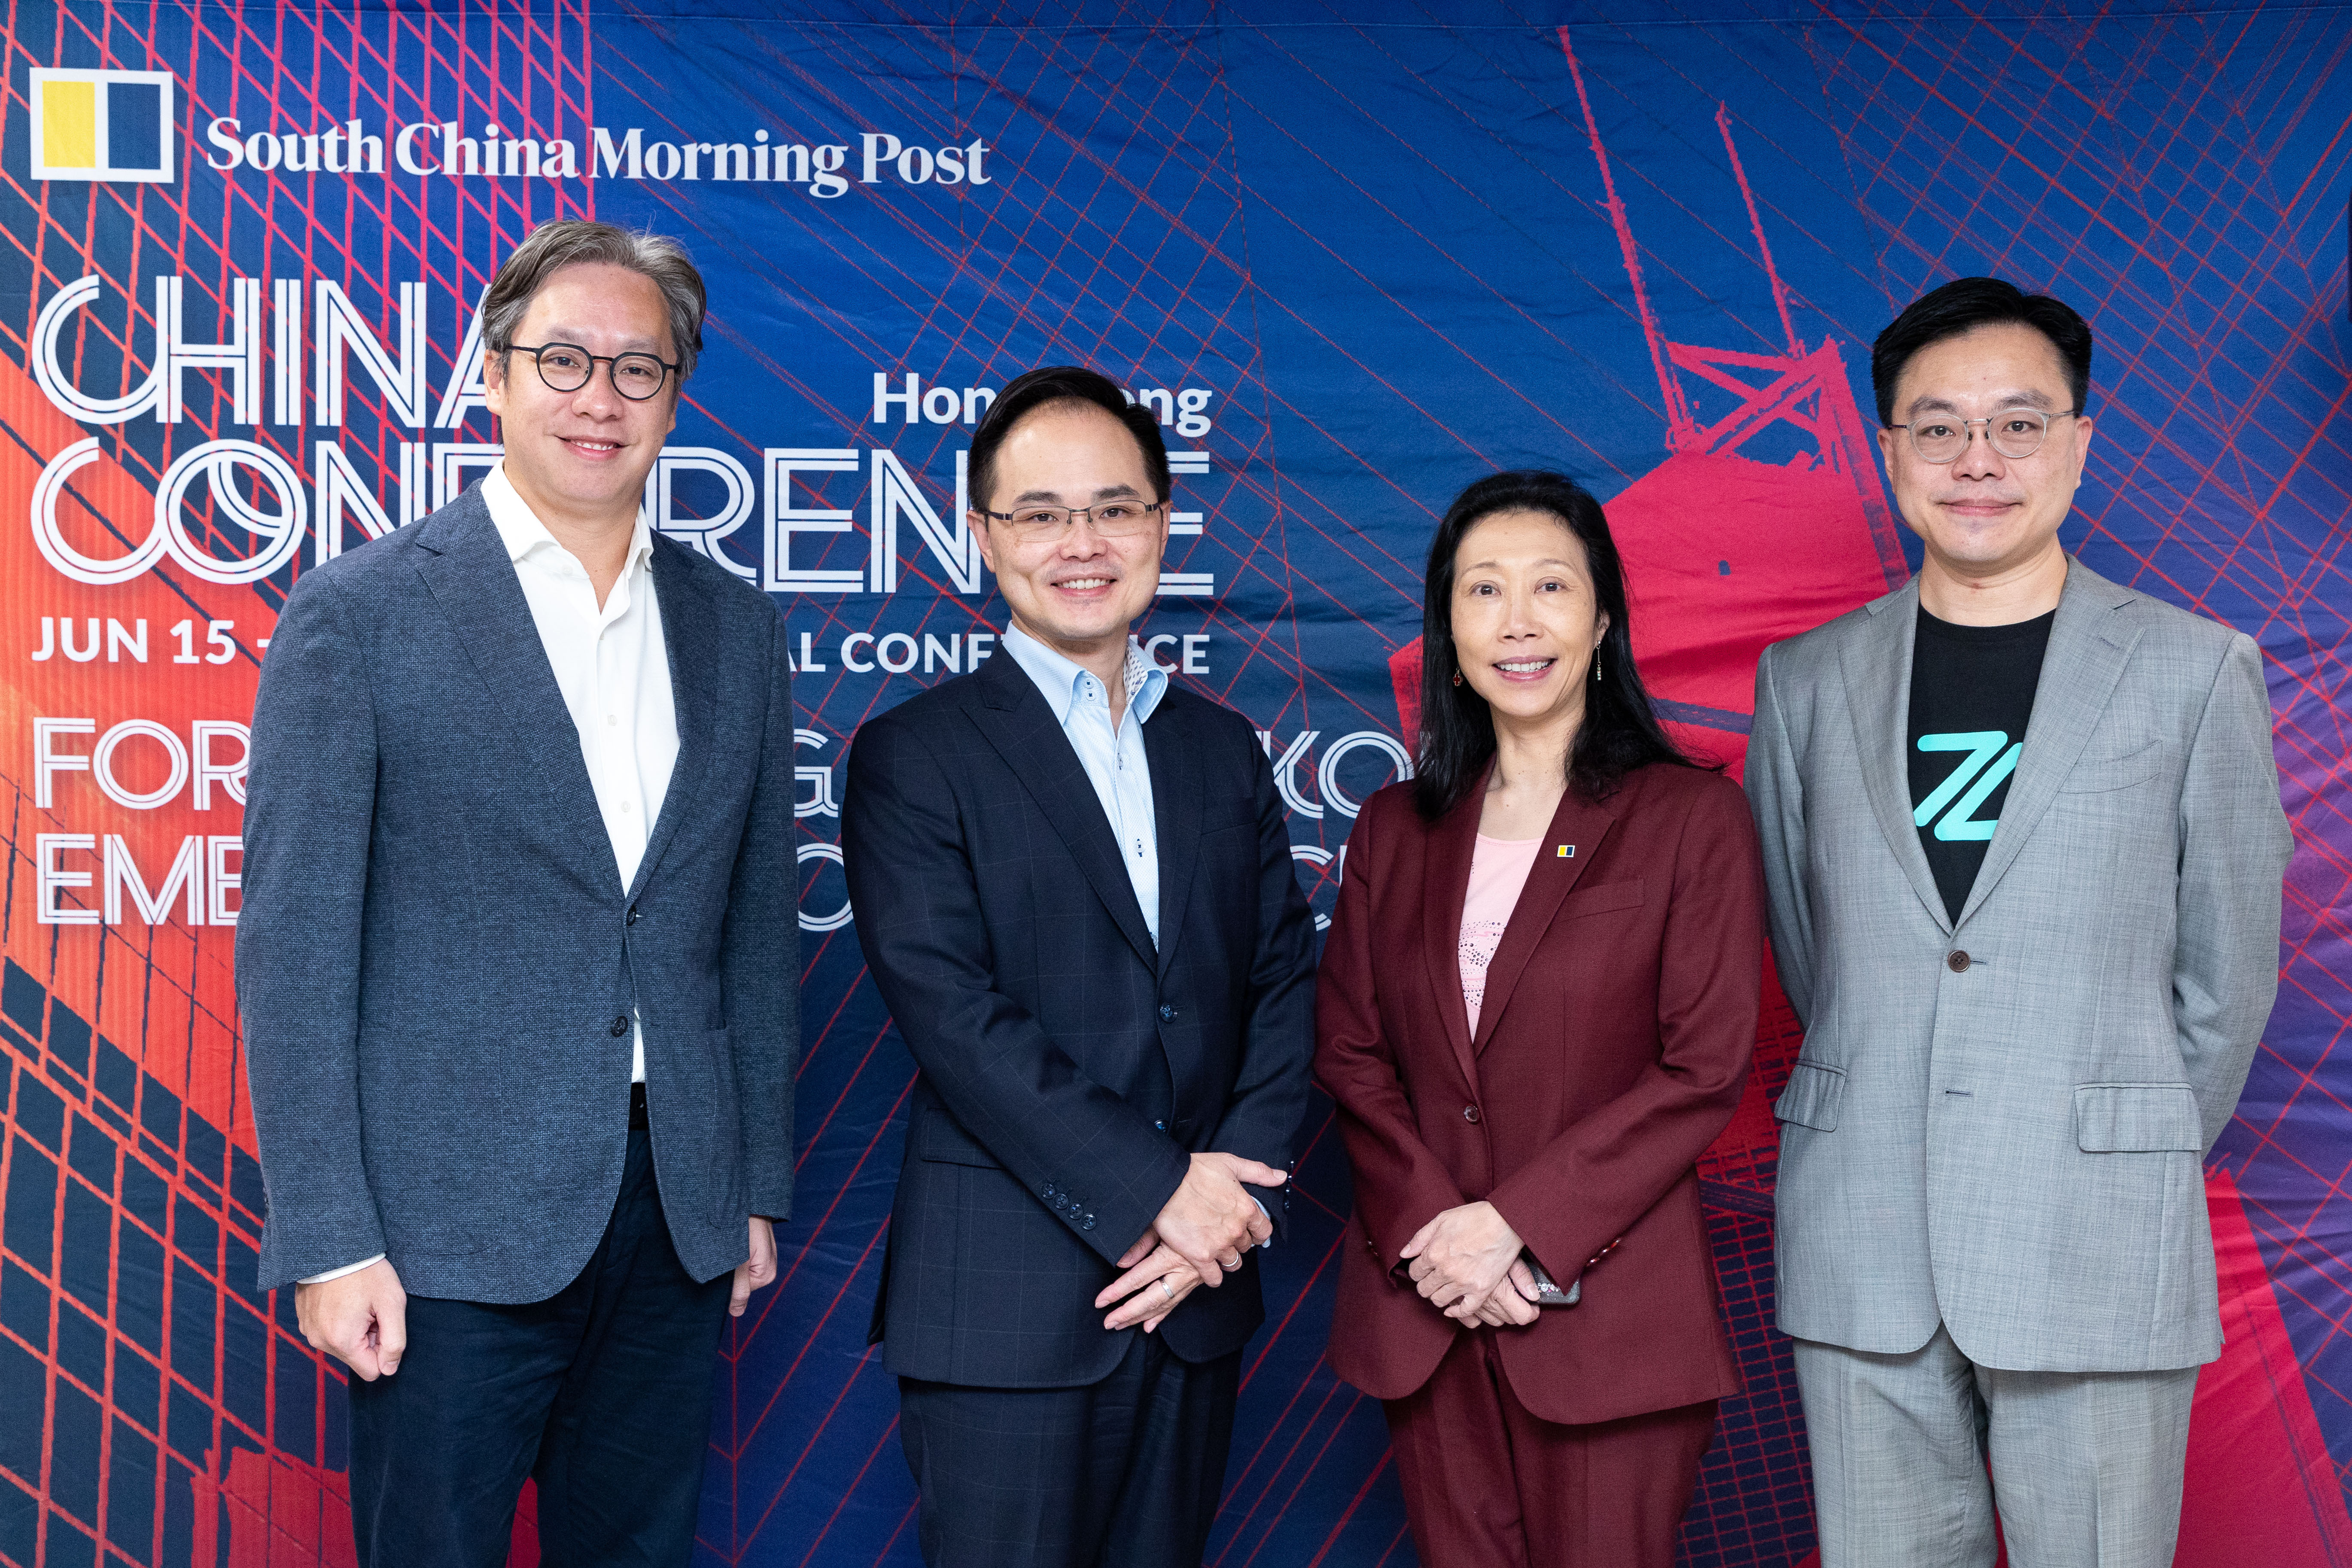 (L-R) Lawrence Lam, Chief Executive & Consumer Business Manager of Citibank Hong Kong; Ryan Fung, Chief Executive of Ping An OneConnect Bank; Enoch Yiu, Chief Reporter specializing in business at SCMP; Rockson Hsu, Chief Executive Officer of ZA Bank. Photo by: Alex Ma